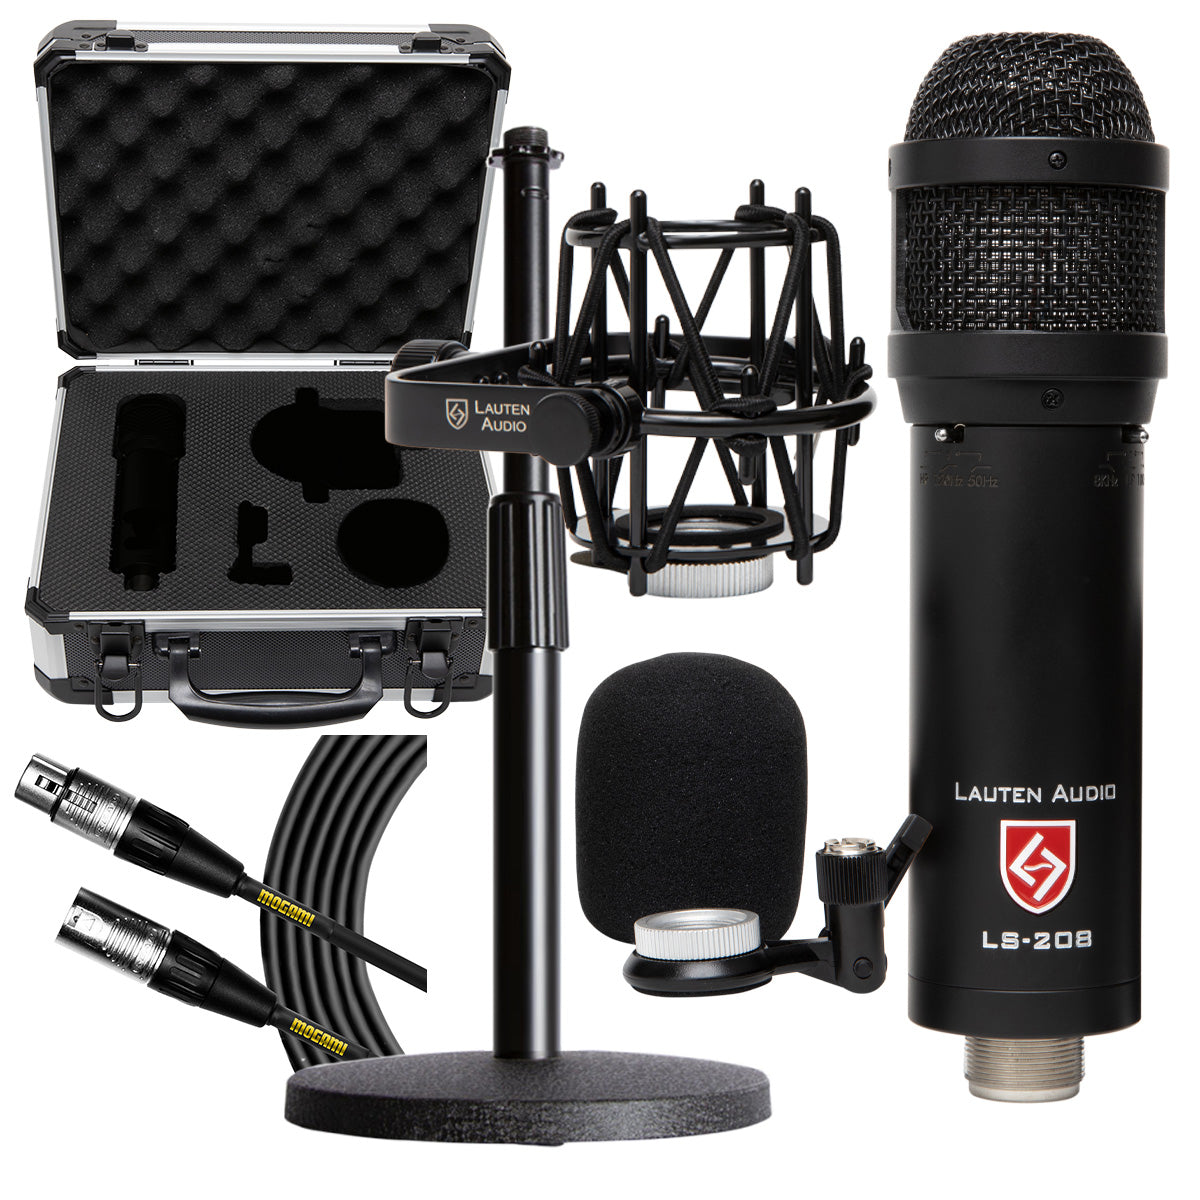 Collage of the components in the Lauten Audio LS-208 Large Diaphragm Condenser Microphone PODCAST PAK bundle